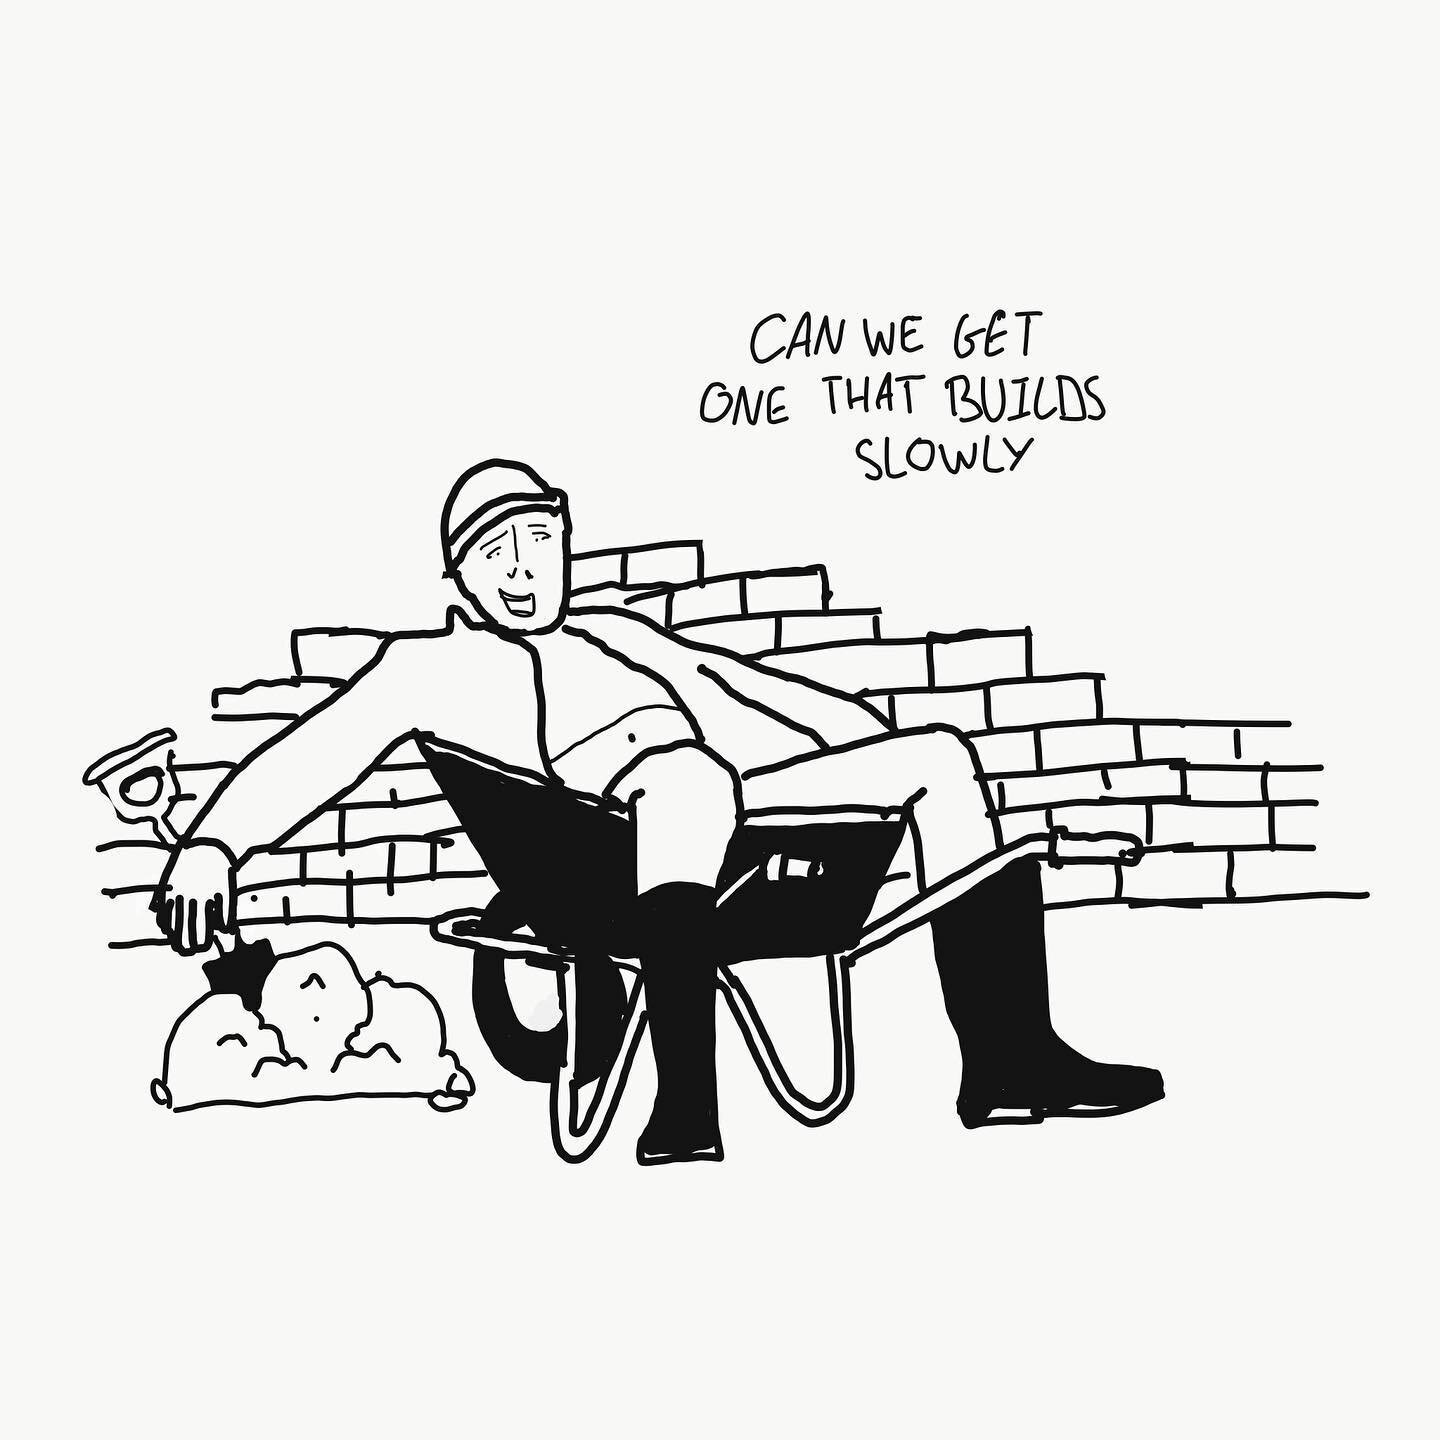 &ldquo;Can We Get One That Builds Slowly?&rdquo; This week&rsquo;s installment of: DON&rsquo;T WORRY, WE KNOW EXACTLY WHAT YOU MEAN
Illustration by @chbucks  #ThingsWeSayInMusicBriefs  #illustration #music #advertising #art #blackandwhite